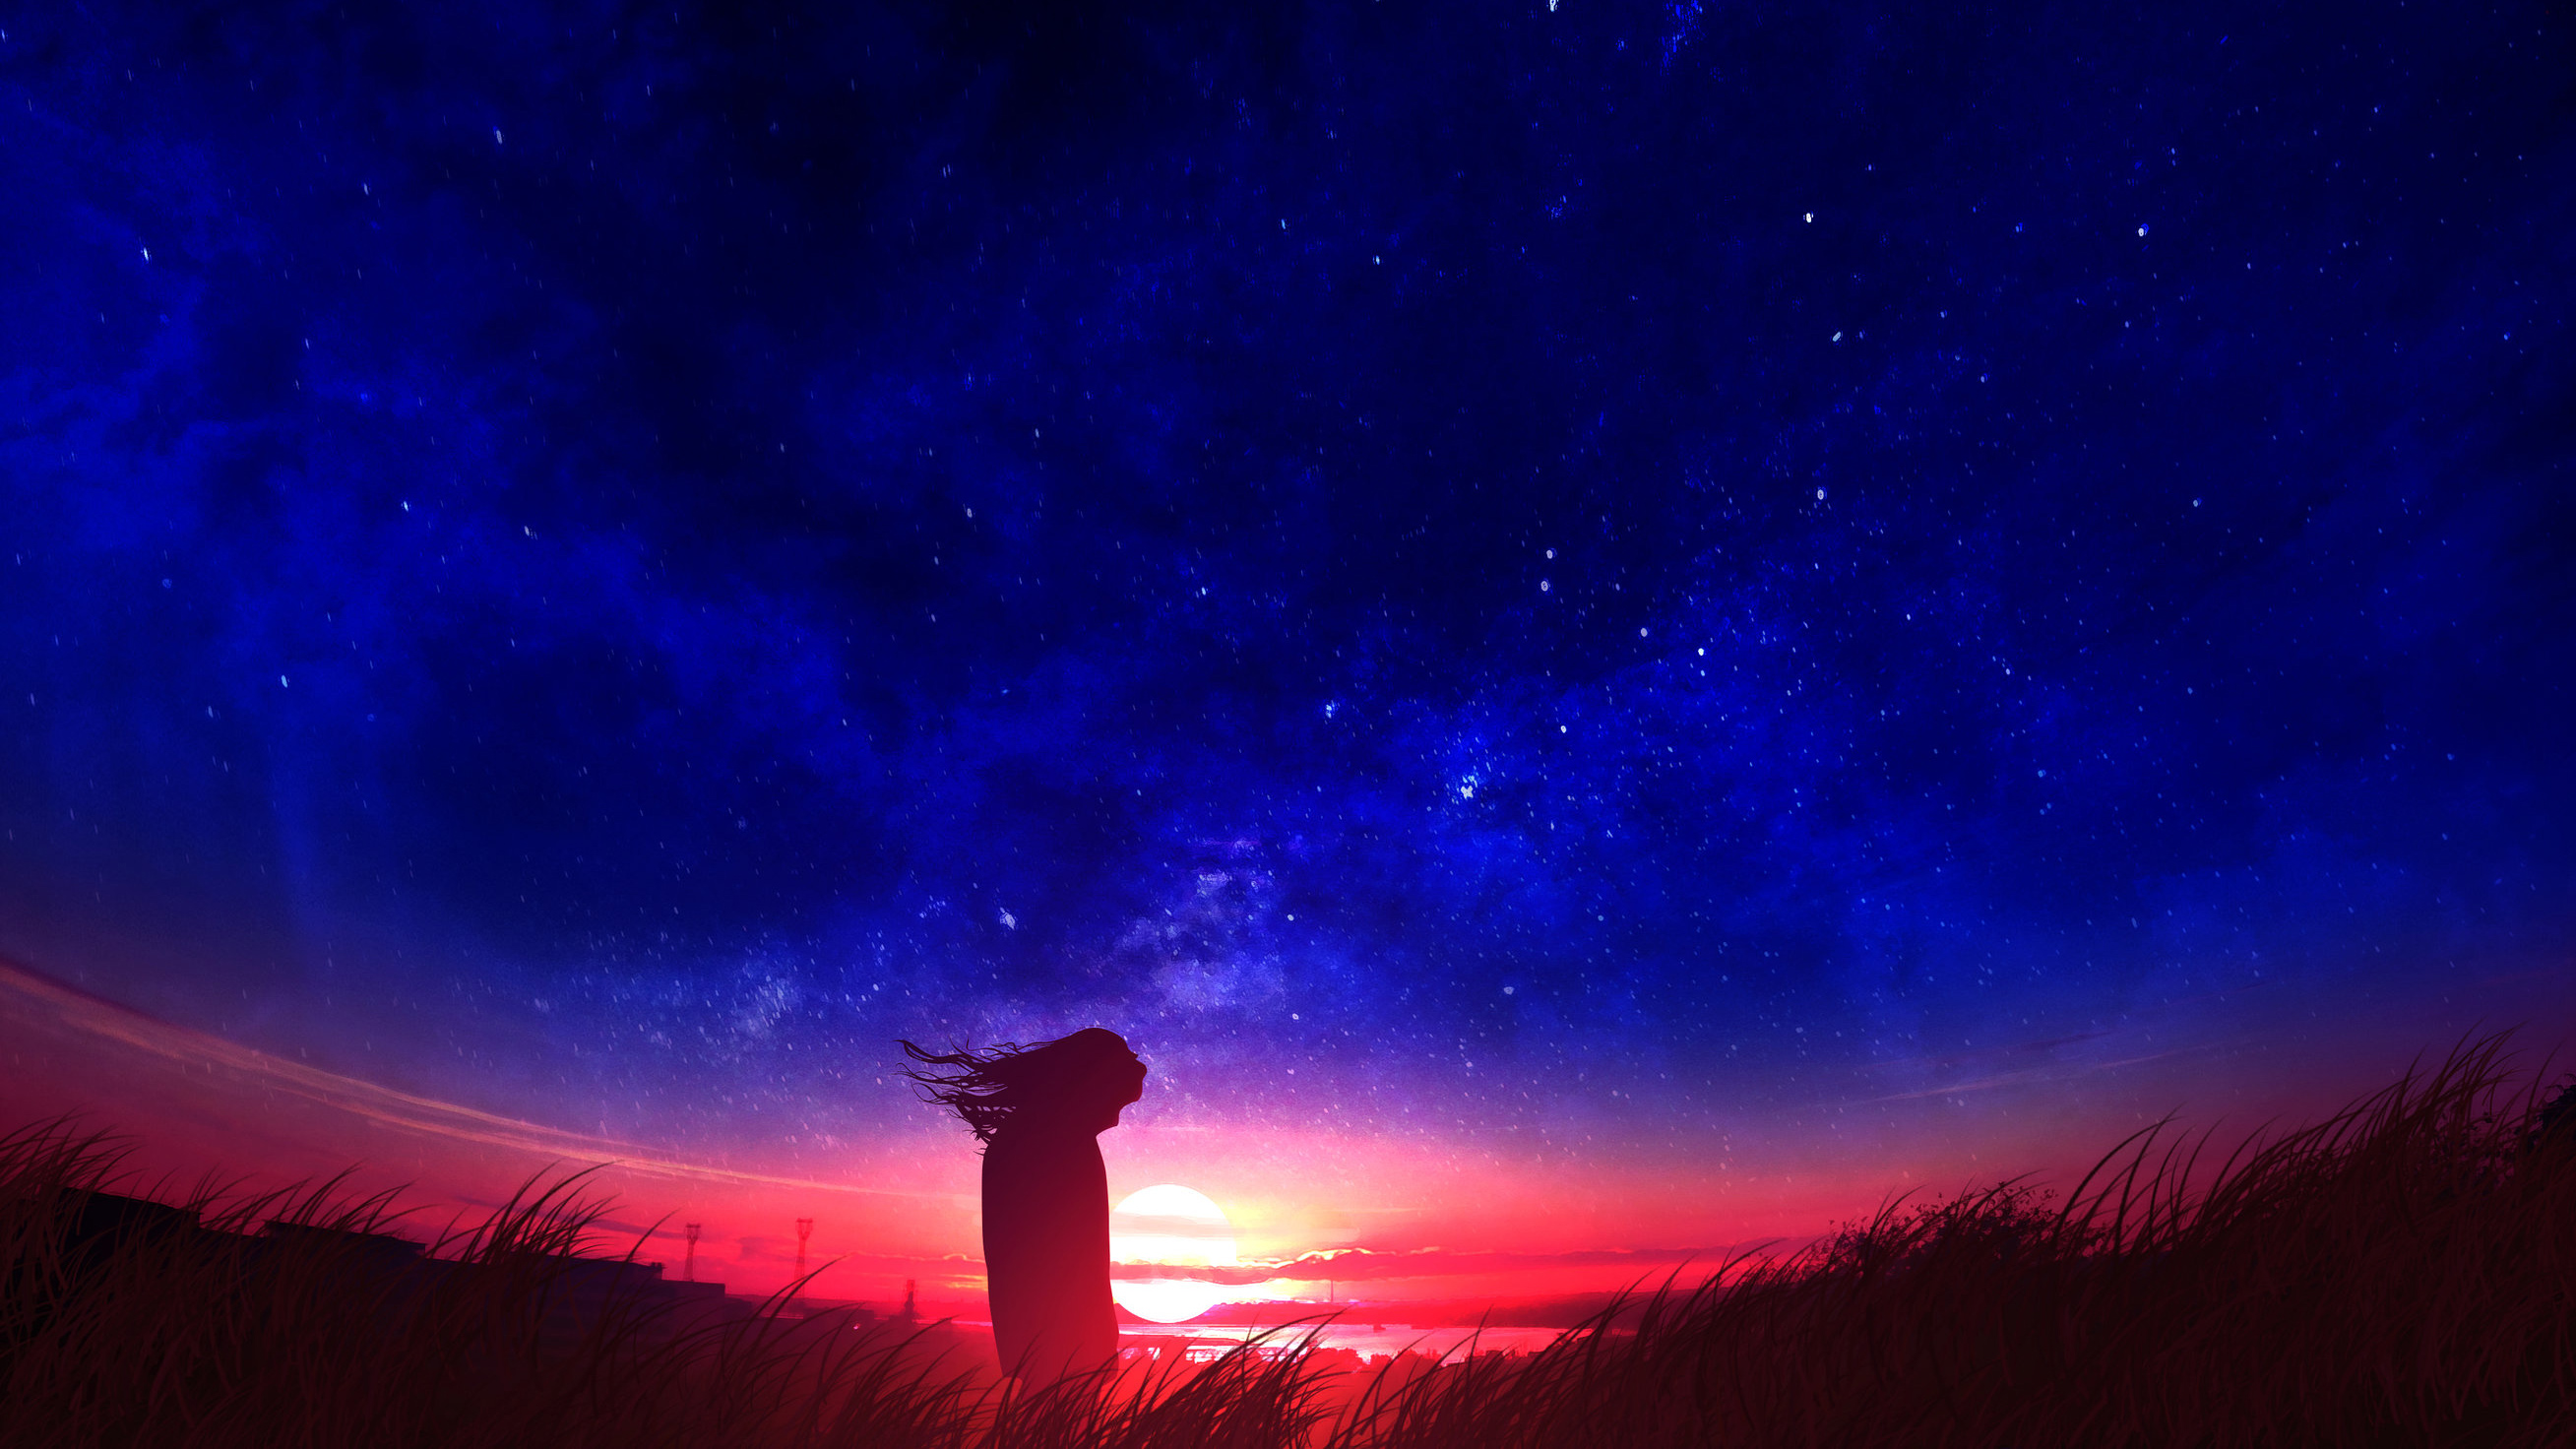 Anime Girl In Field Silhouette Sunset Hd Anime 4k Wallpapers Images